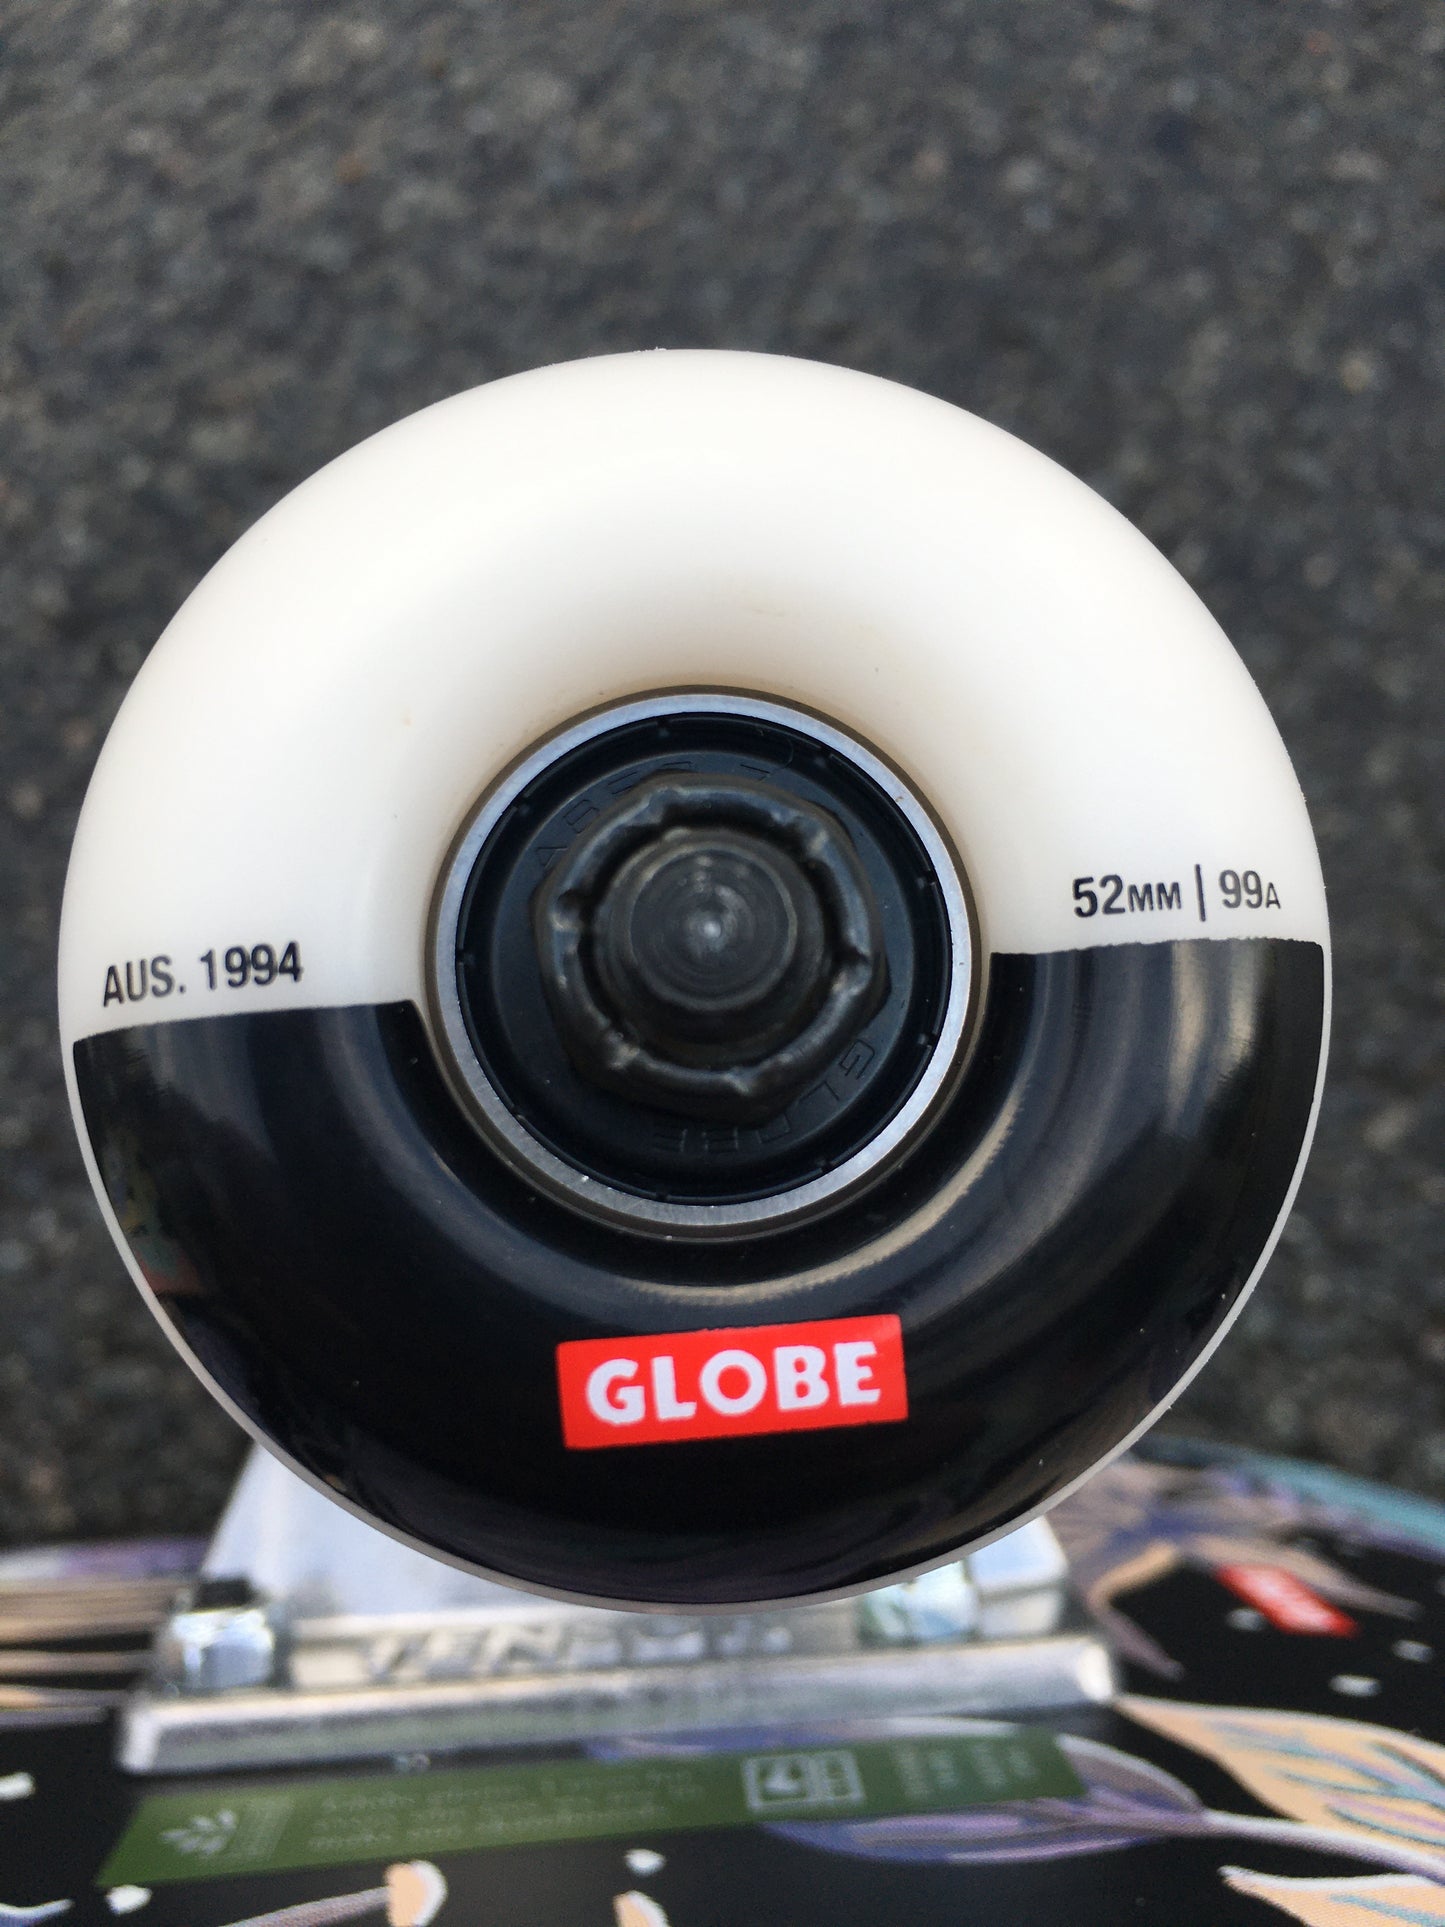 GLOBE - G1 STAY TUNED COMPLETE - 8.0